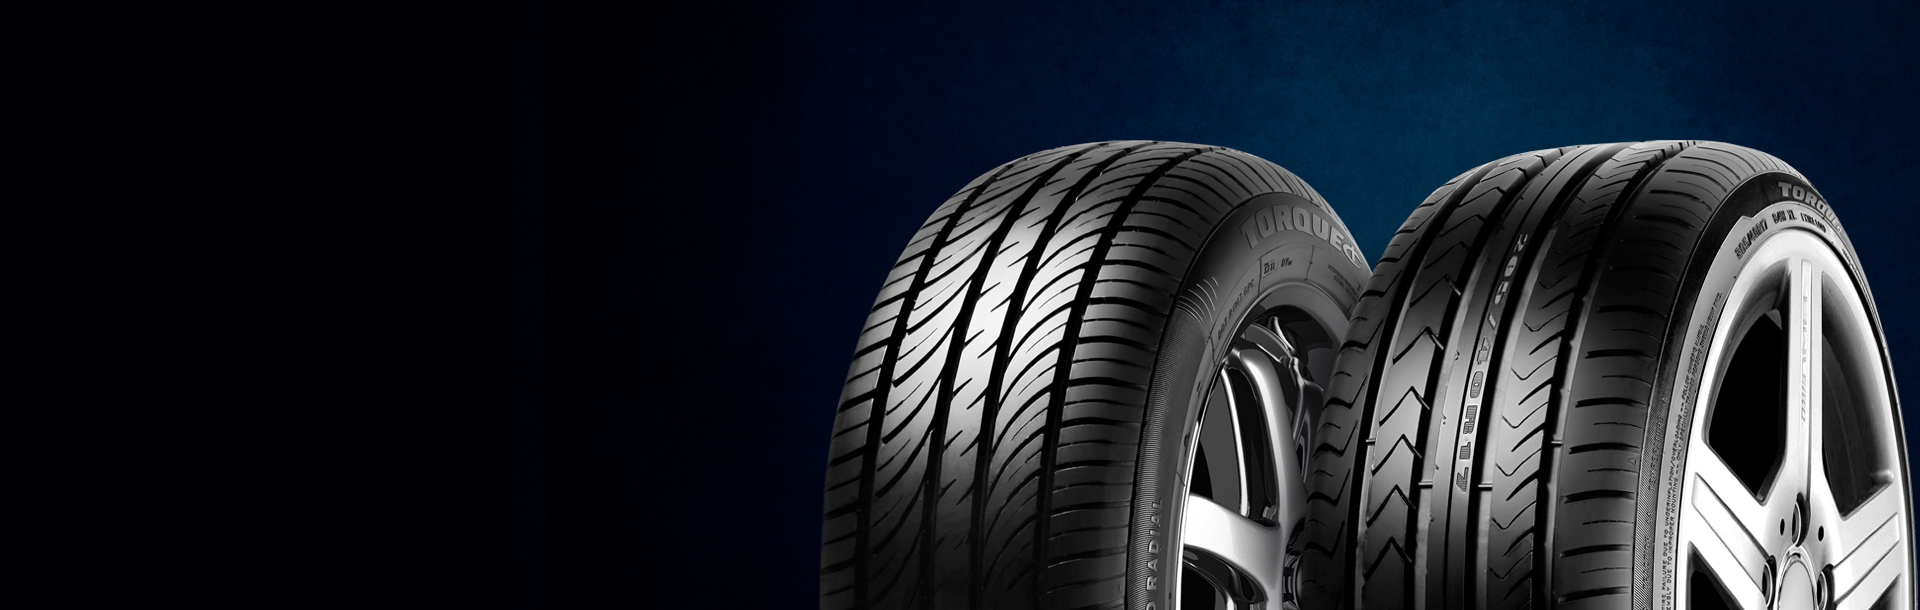 Over 116,000 Premium, Mid-range, Exclusive and Budget Car Tyres